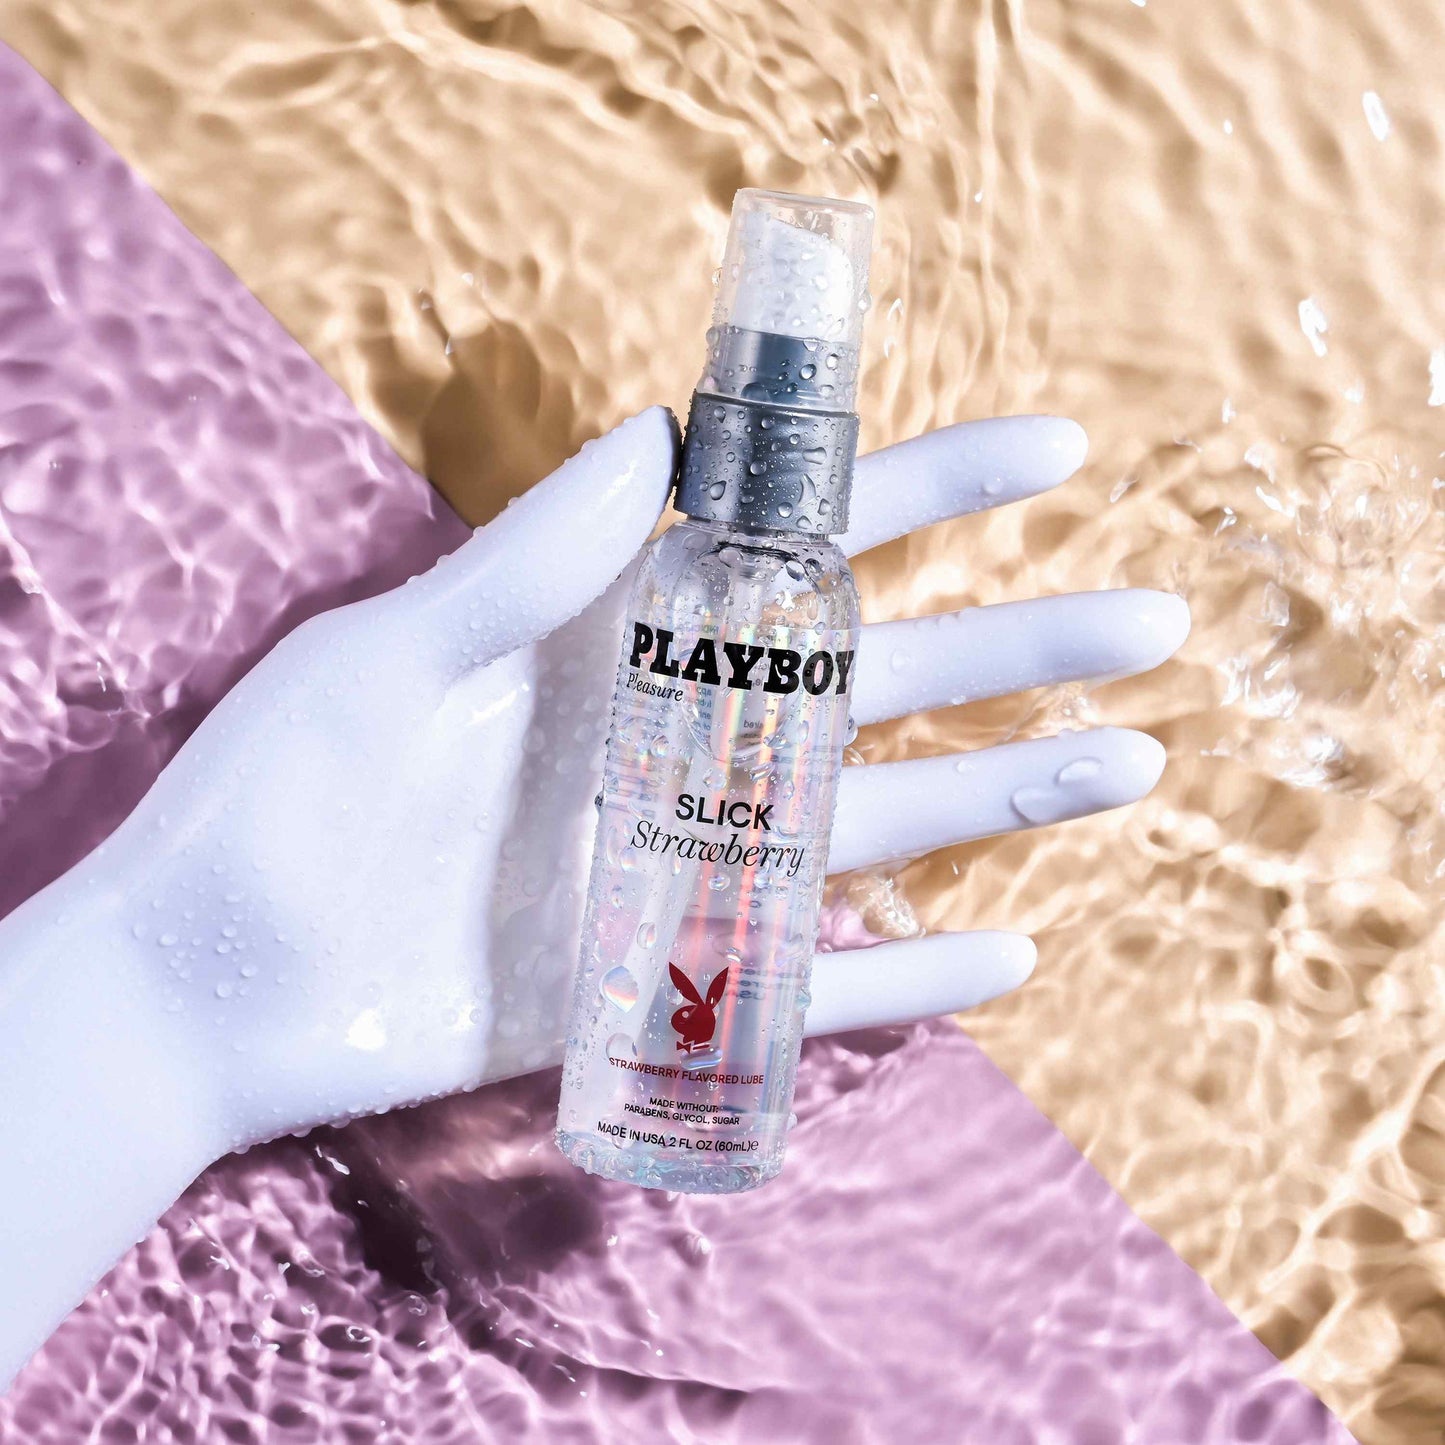 Playboy Slick Strawberry Flavored Lubricant - XOXTOYS